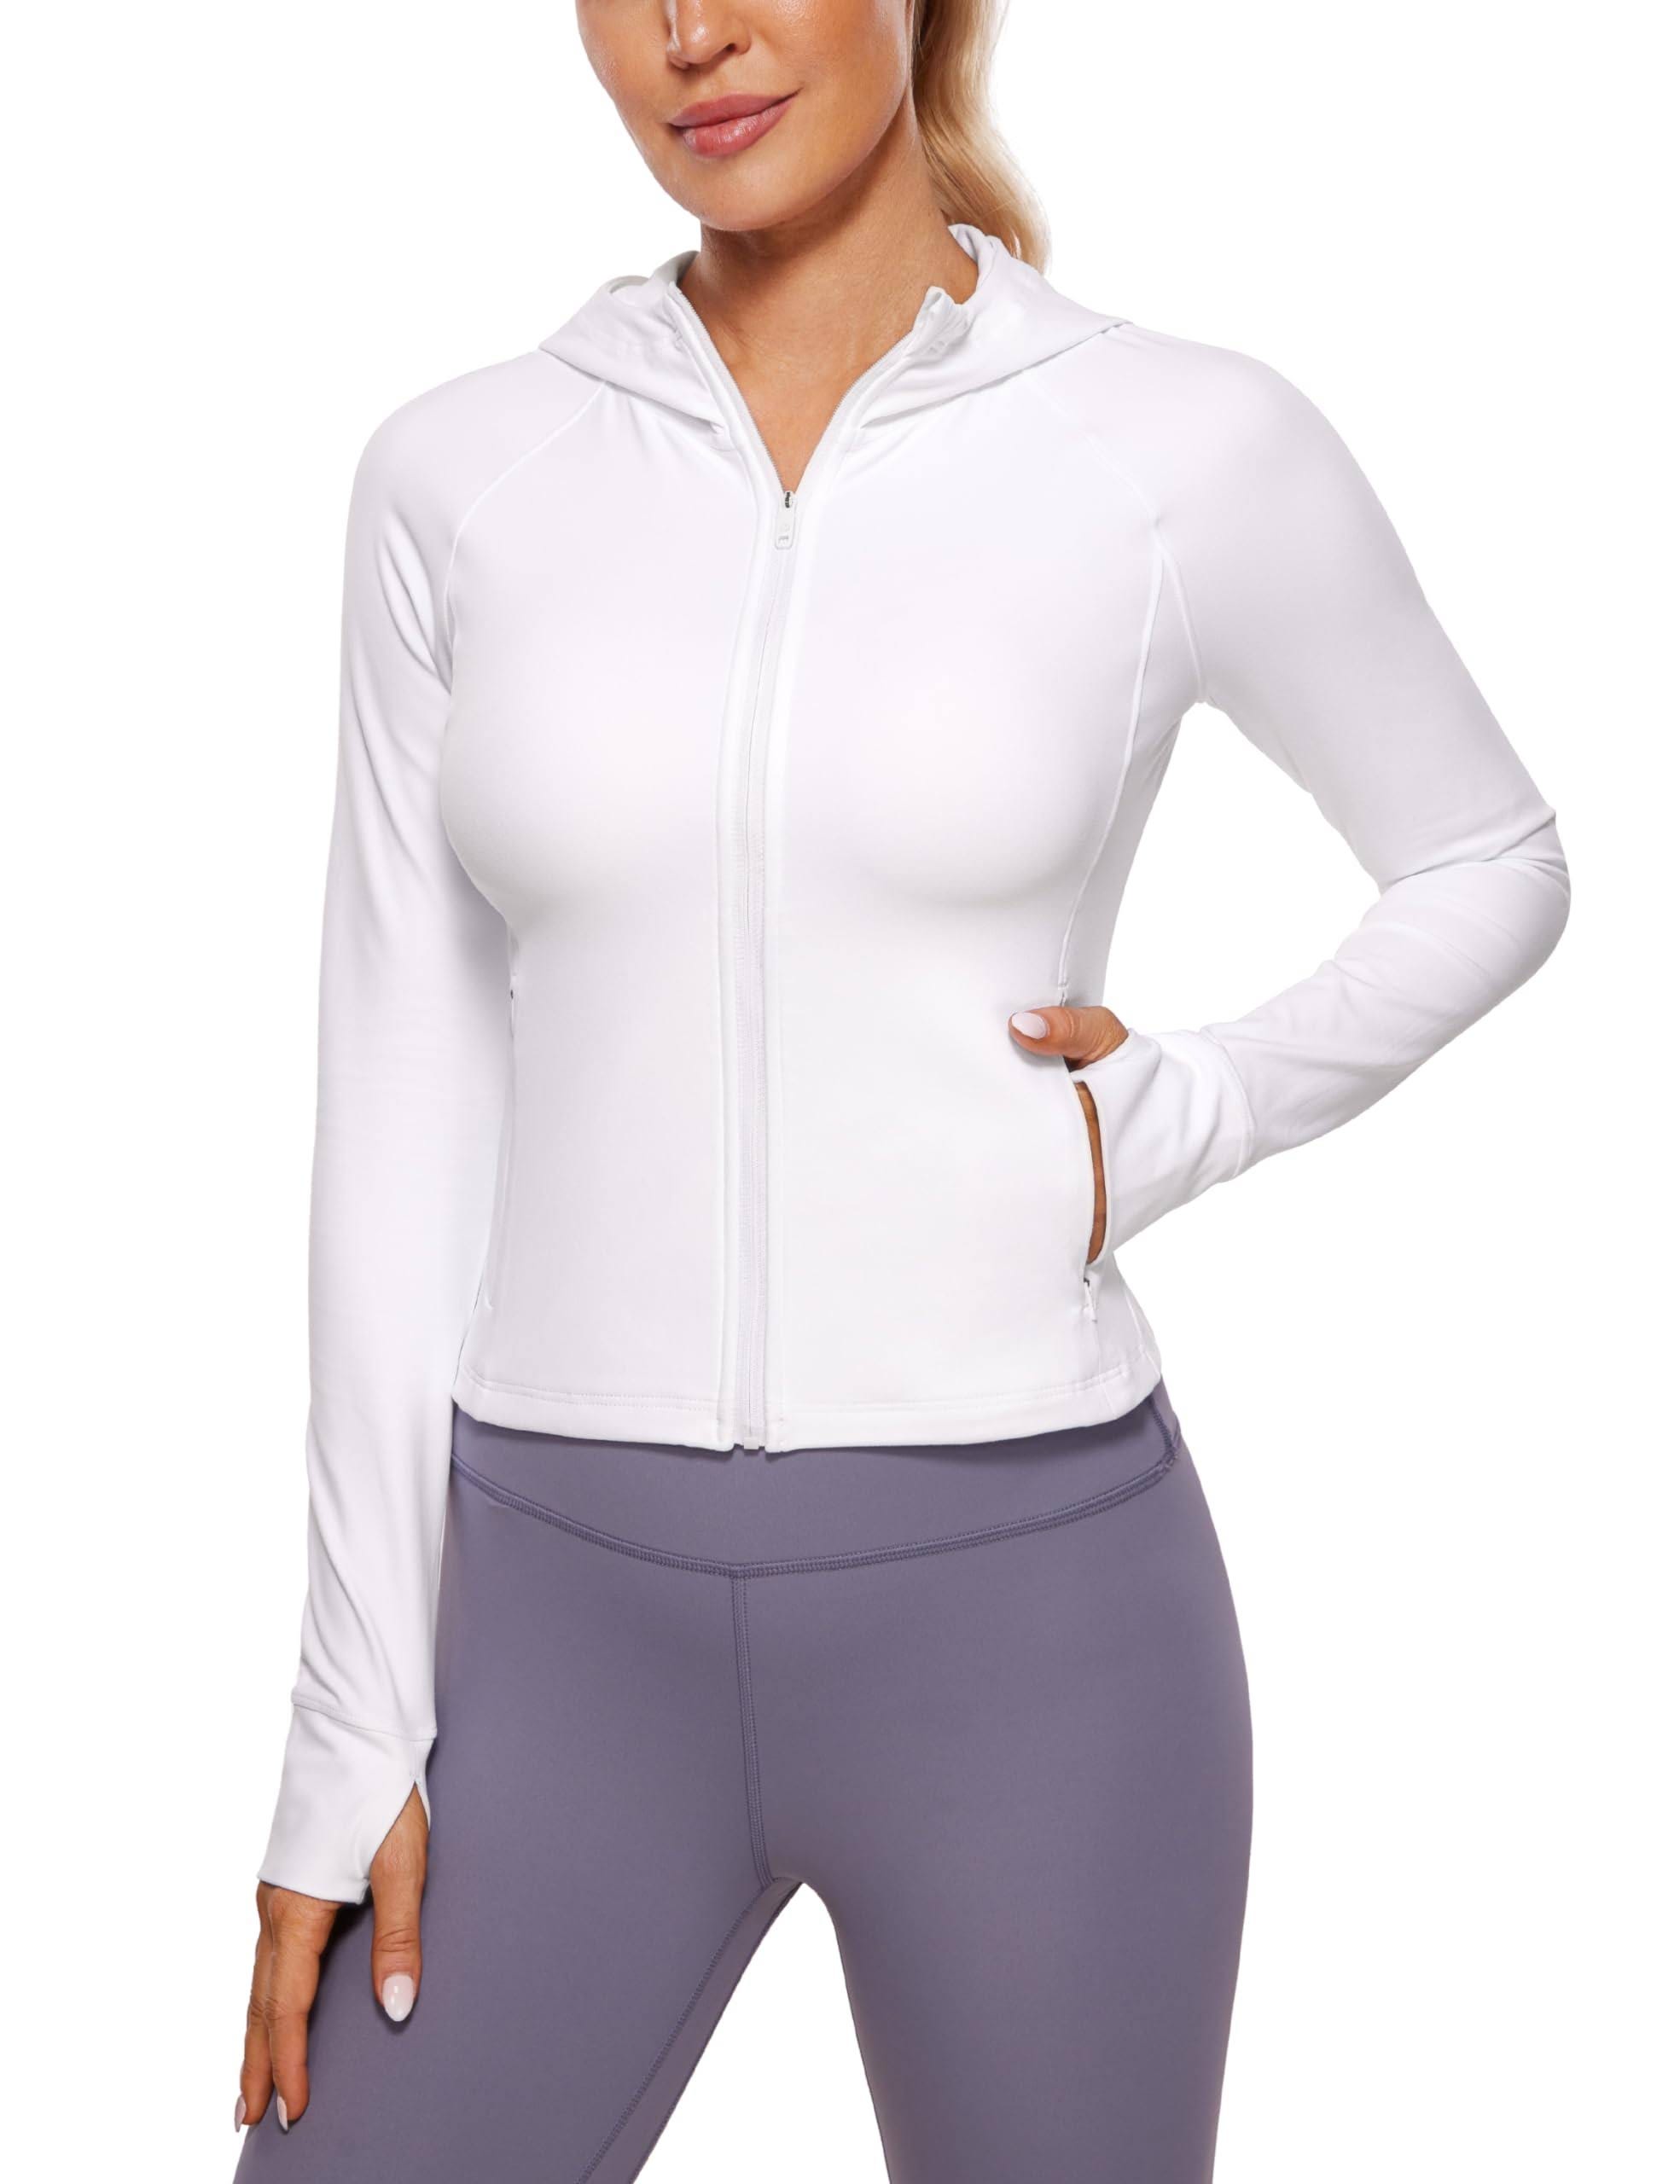 Comfortable White Zip Up Hoodie for Low-Impact Workouts | Image